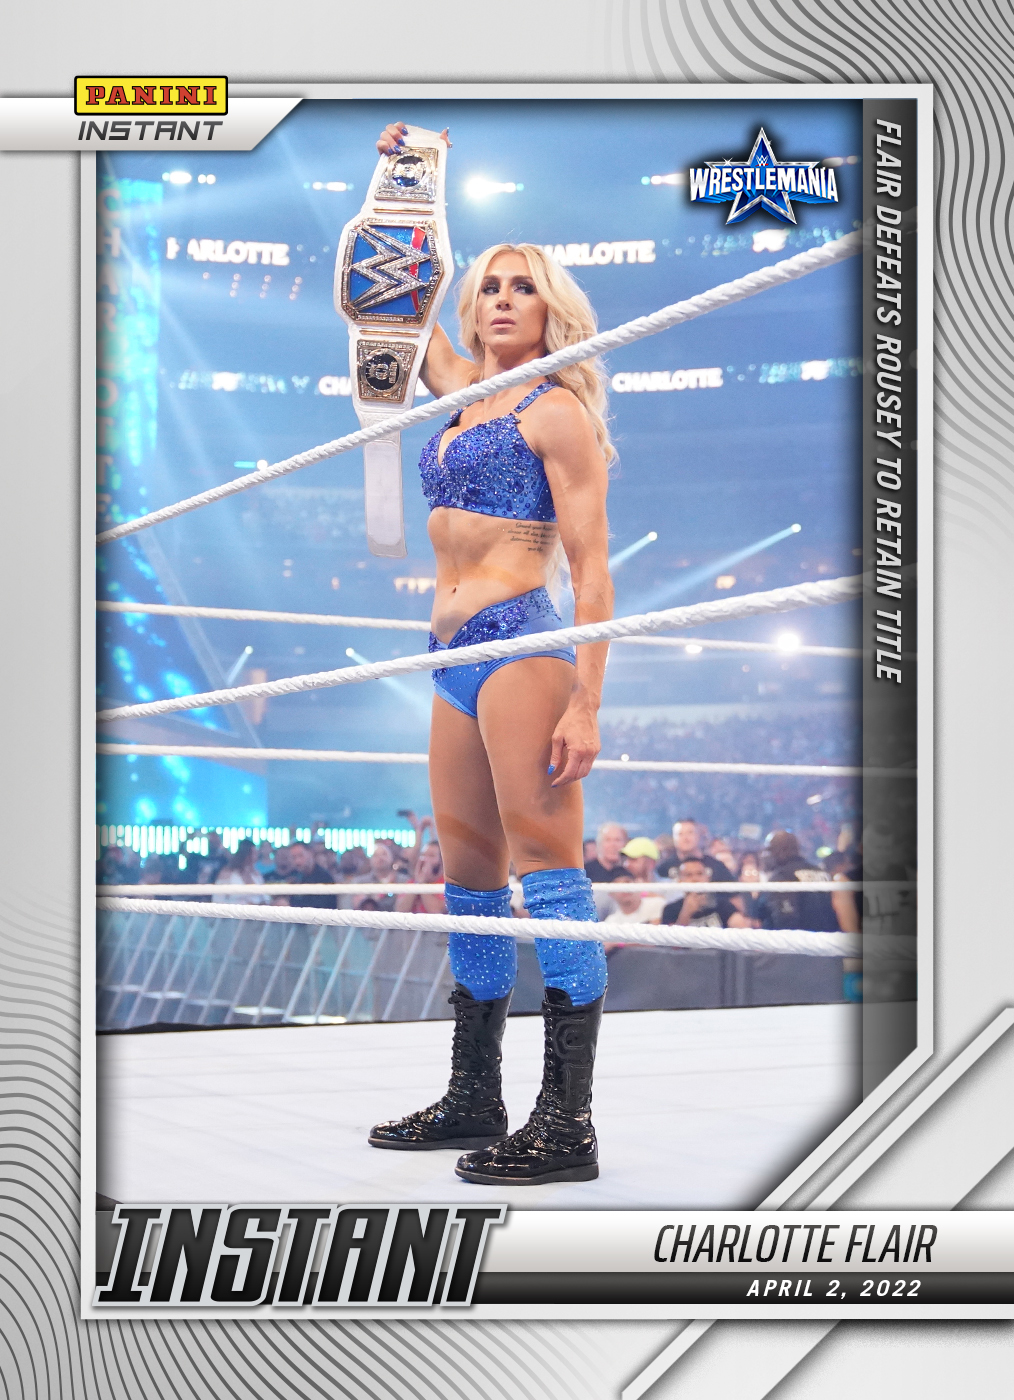 https://static.wikia.nocookie.net/prowrestling/images/9/91/2022_WWE_%28Panini_Instant%29_Charlotte_Flair_%28No.11%29.jpg/revision/latest?cb=20220407225052